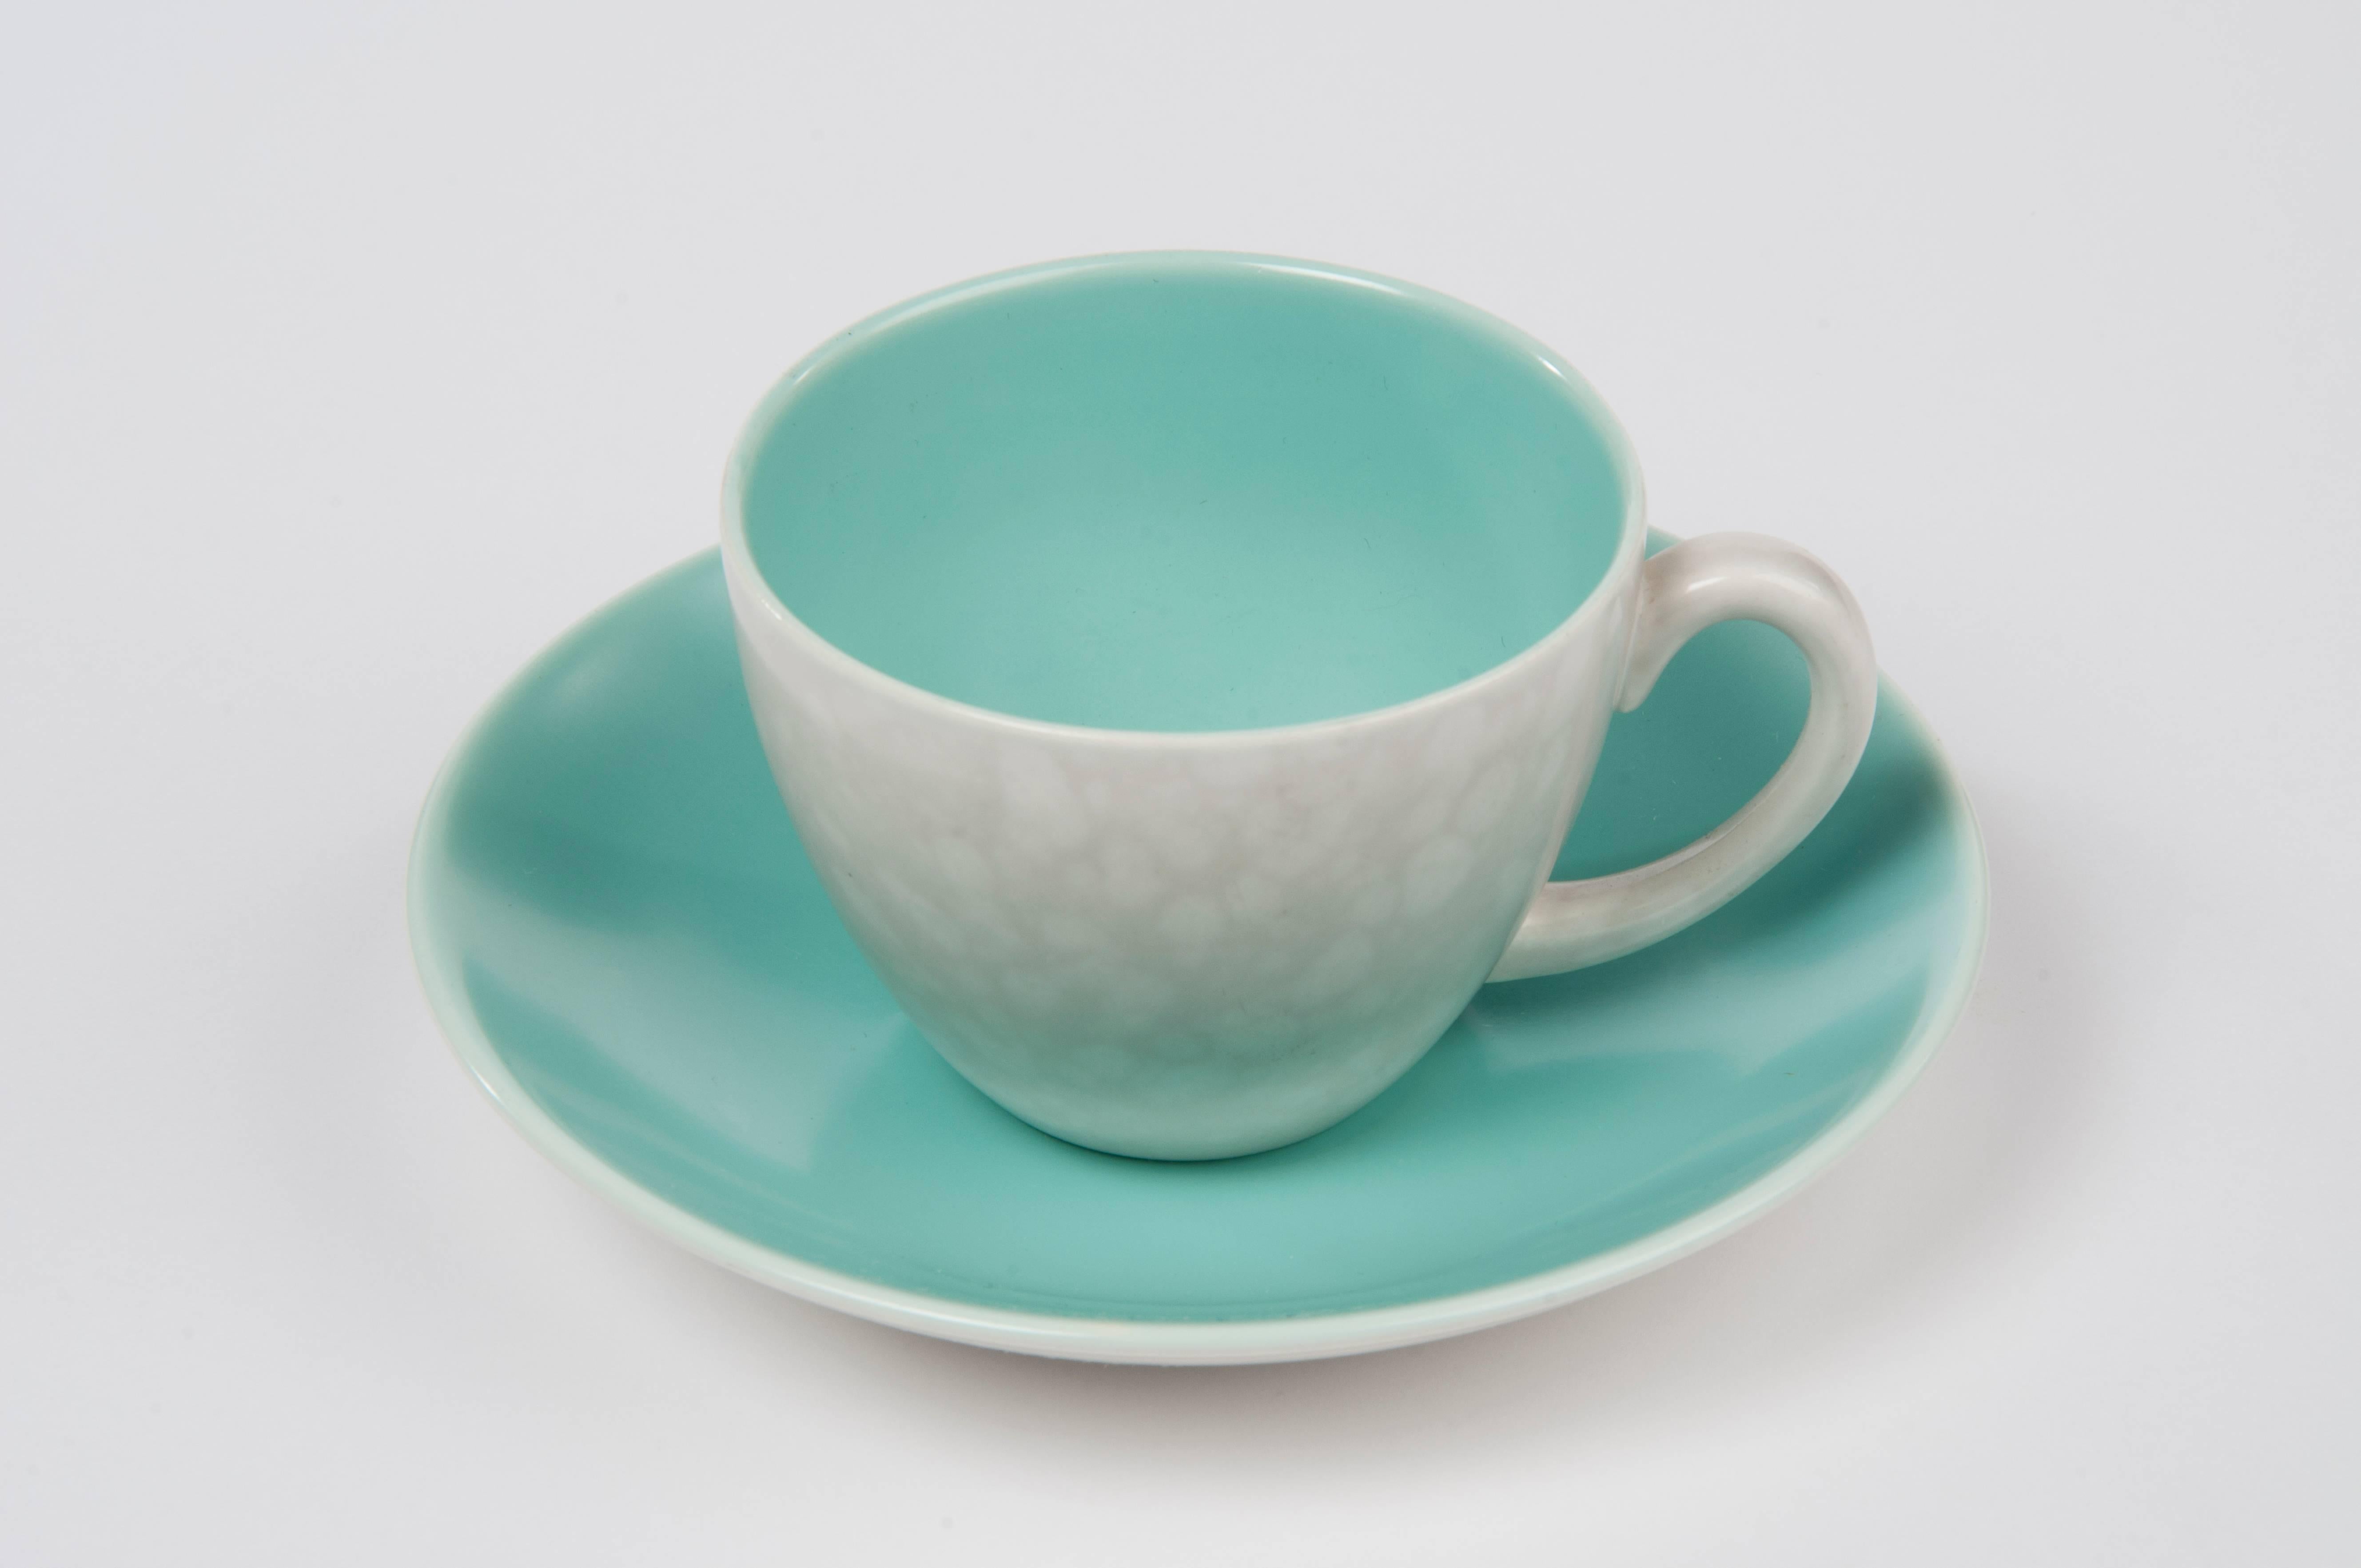 Graceful and elegant 1950s coffee and dinner service by Poole England in silky bright turquoise and spotted grey. Designed by Guy Sydenham and Alfred Read. The surface has a silky touch and shimmer. The grey resembles of mother-of-pearl.
FREE